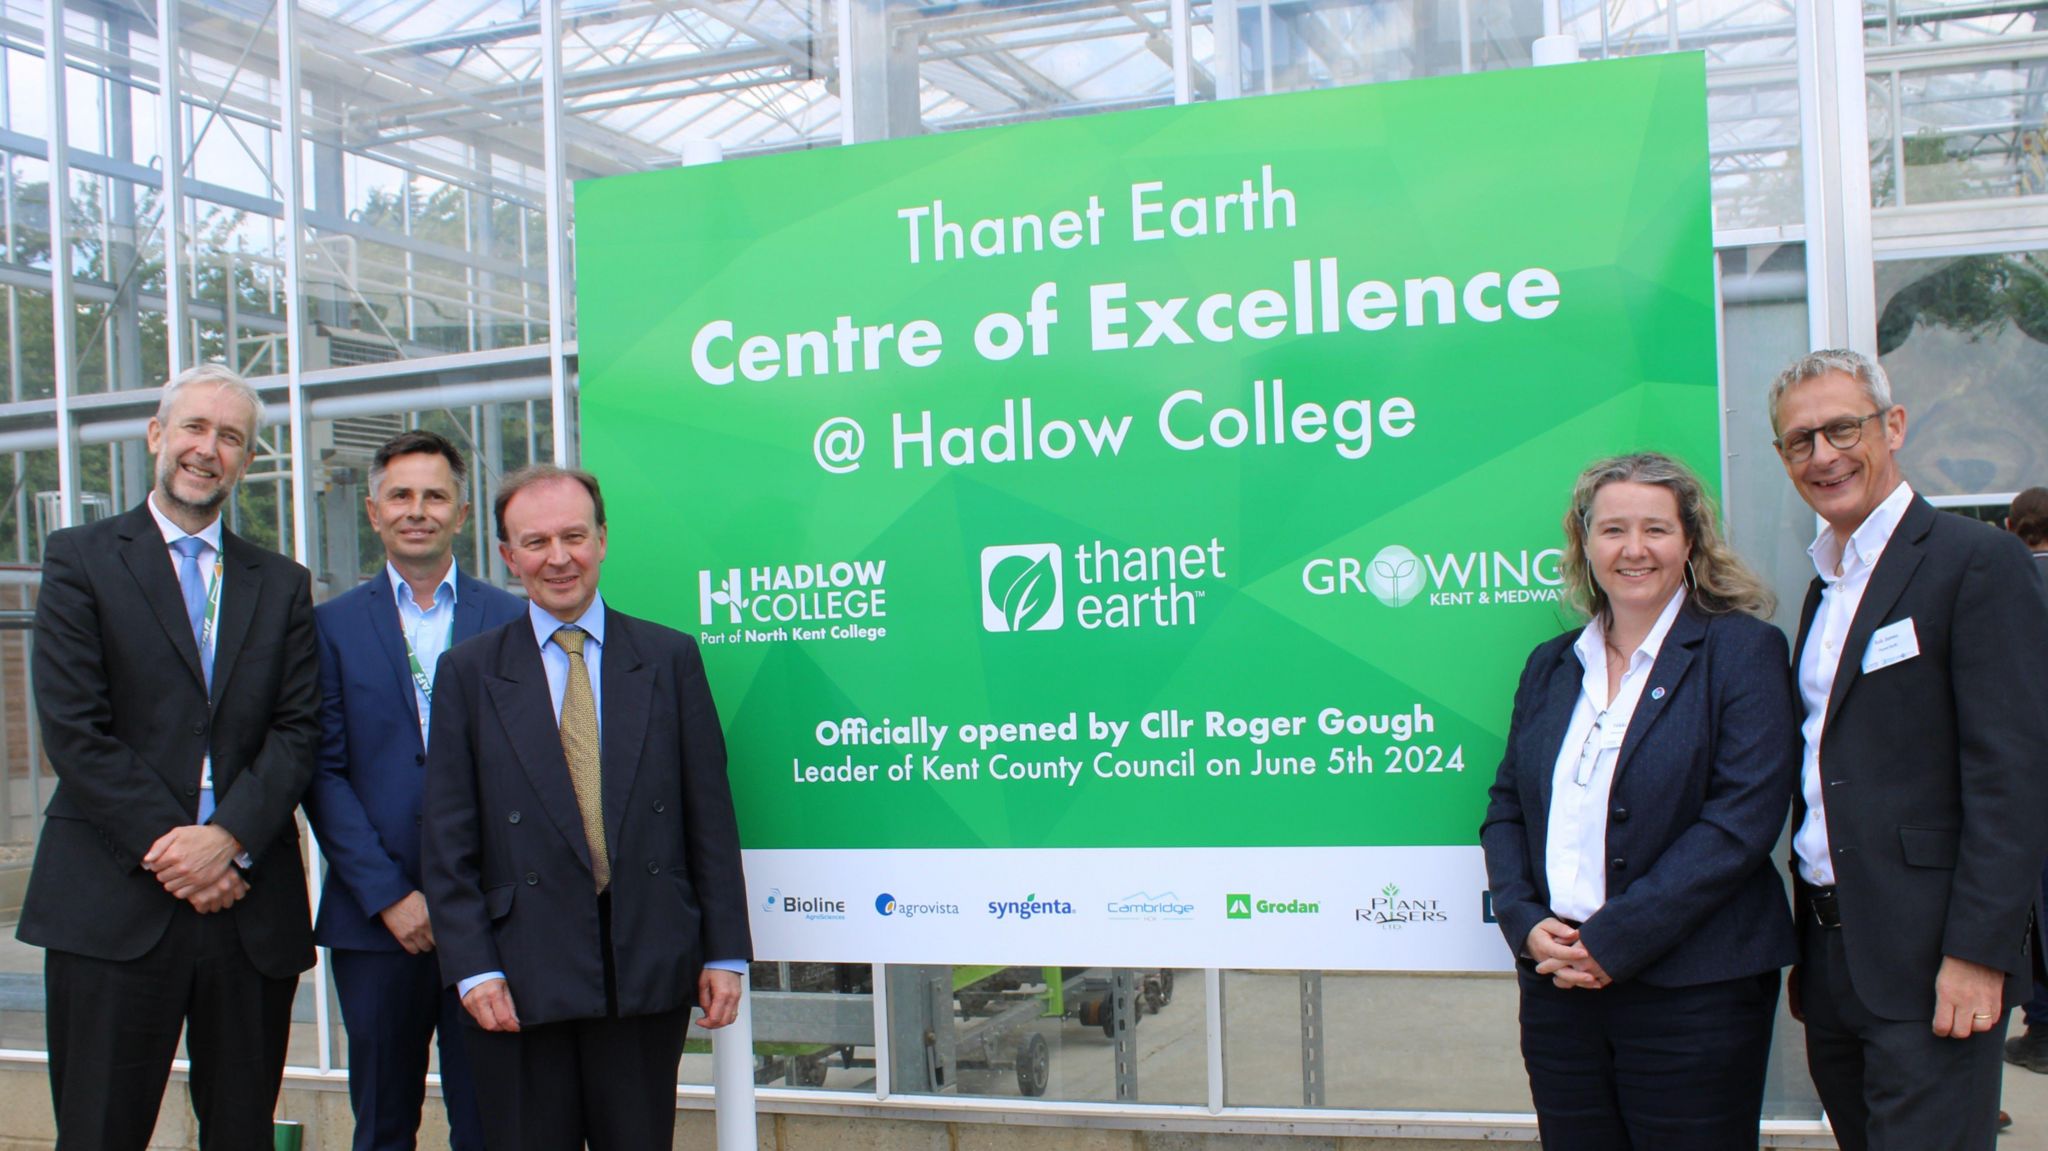 L-R: Chris Lydon, Hadlow College vice Principal, Alan Harvey, head of curriculum for Horticulture & Floristry at Hadlow College, leader of Kent County Council Roger Gough, Dr Nikki Harrison, director at Growing Kent & Medway, and Robert James, technical director for Thanet Earth.